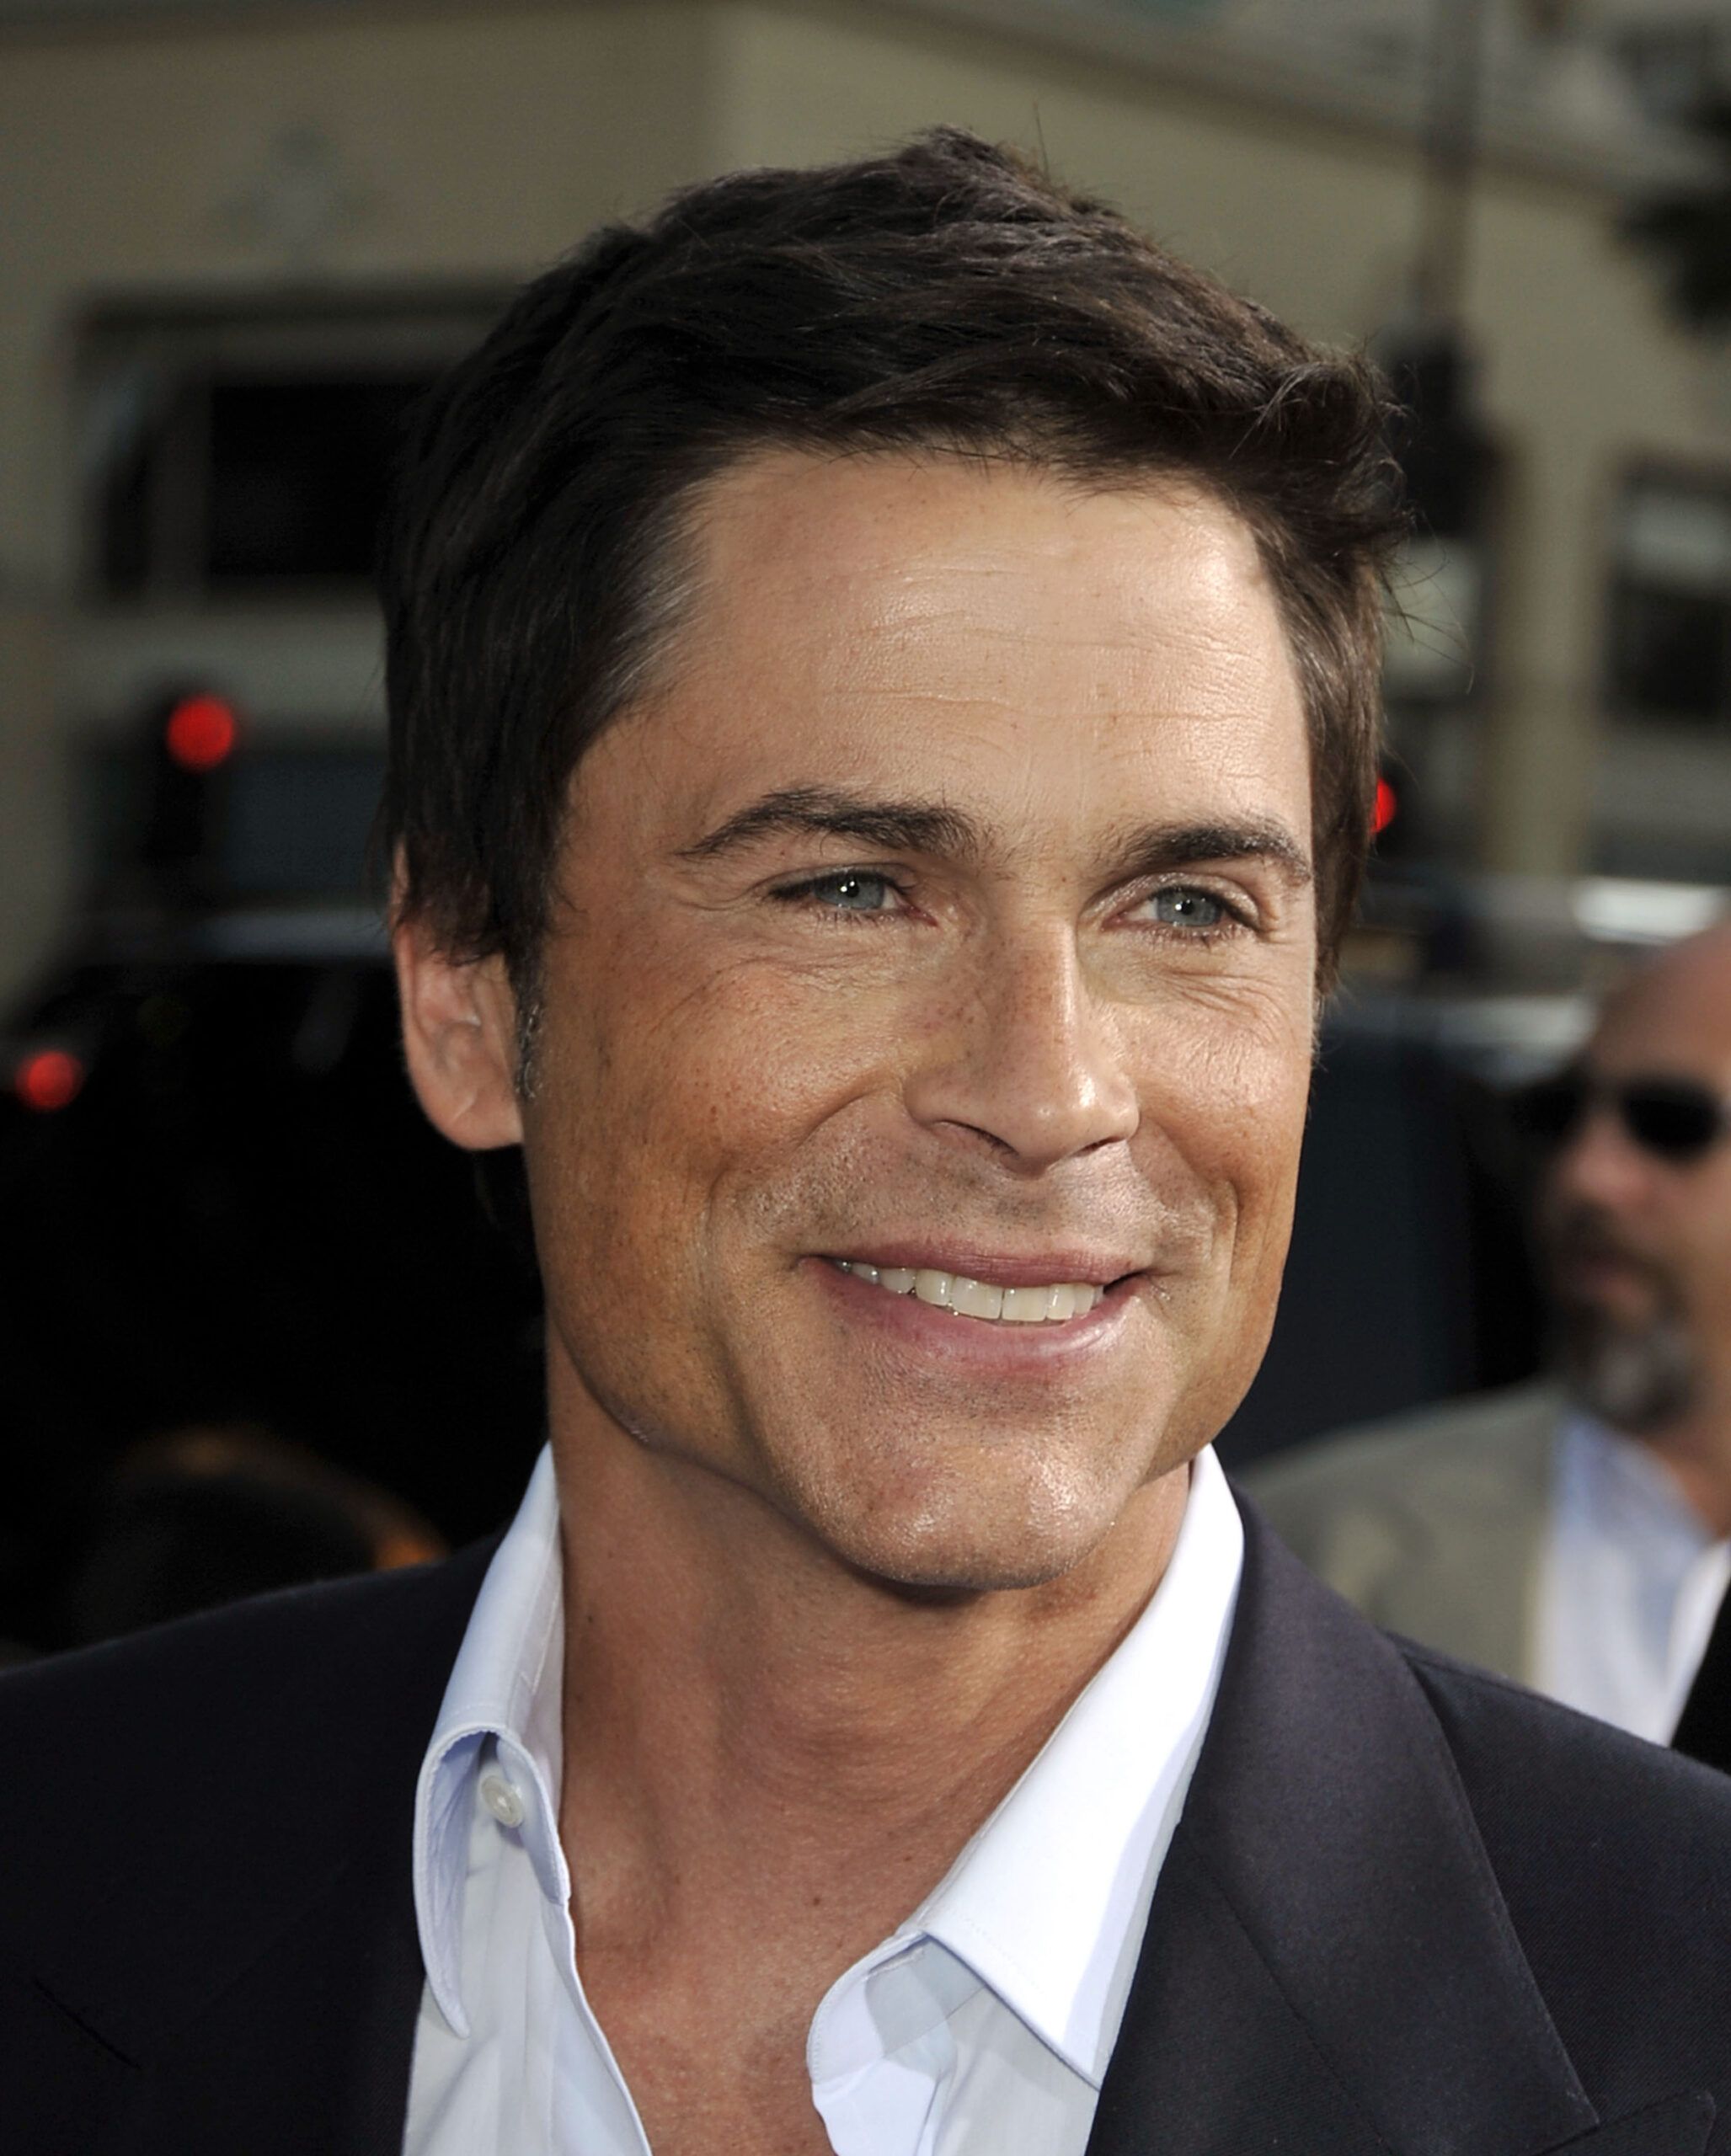 Rob Lowe opens up about his family's battle with cancer -- Guideposts